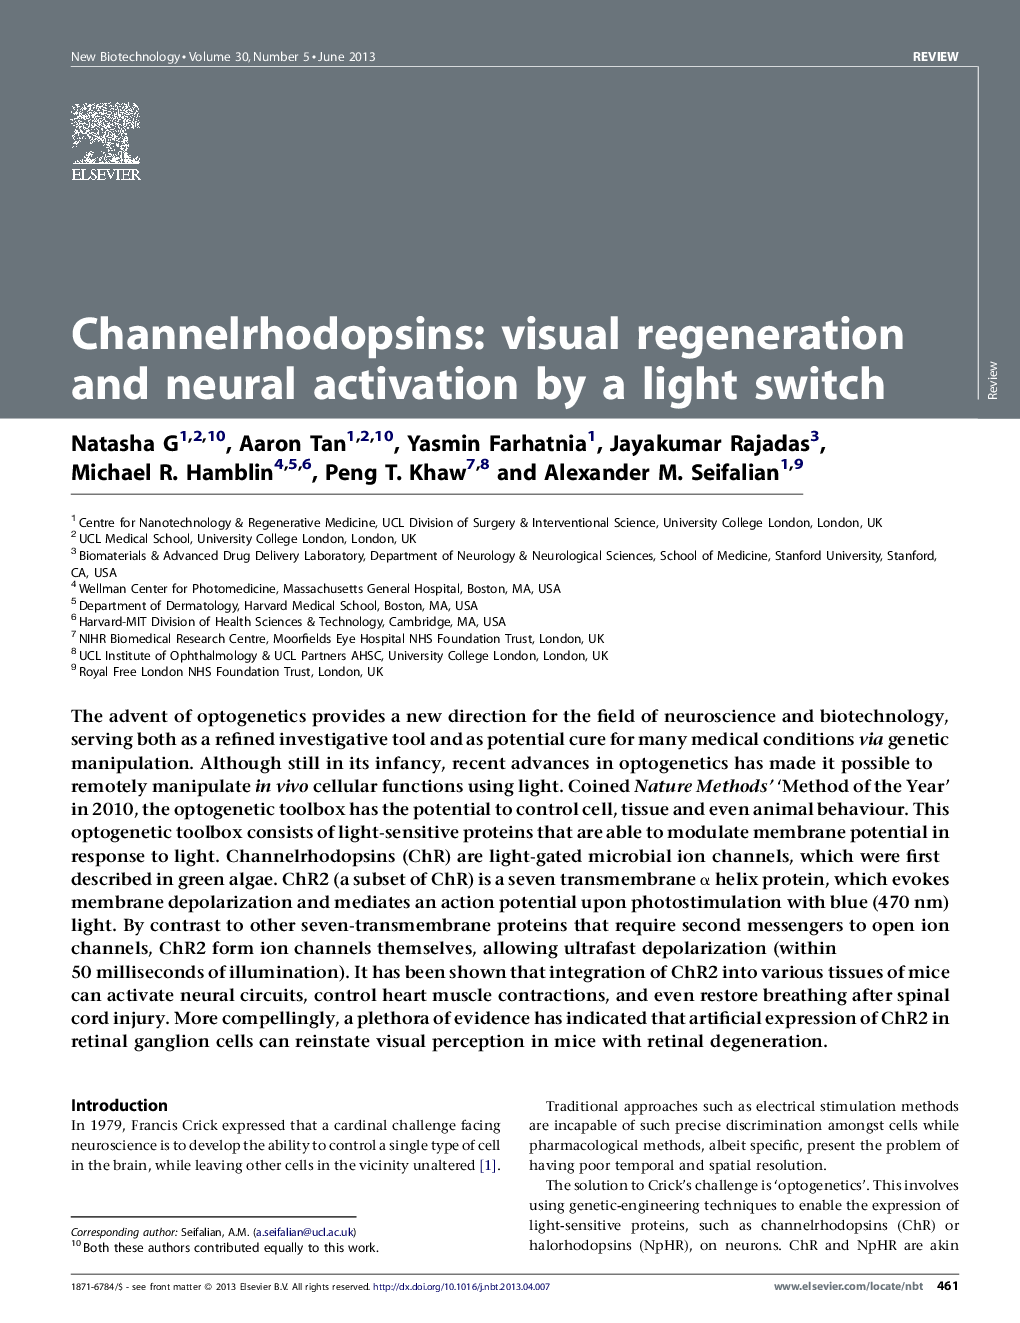 Channelrhodopsins: visual regeneration and neural activation by a light switch